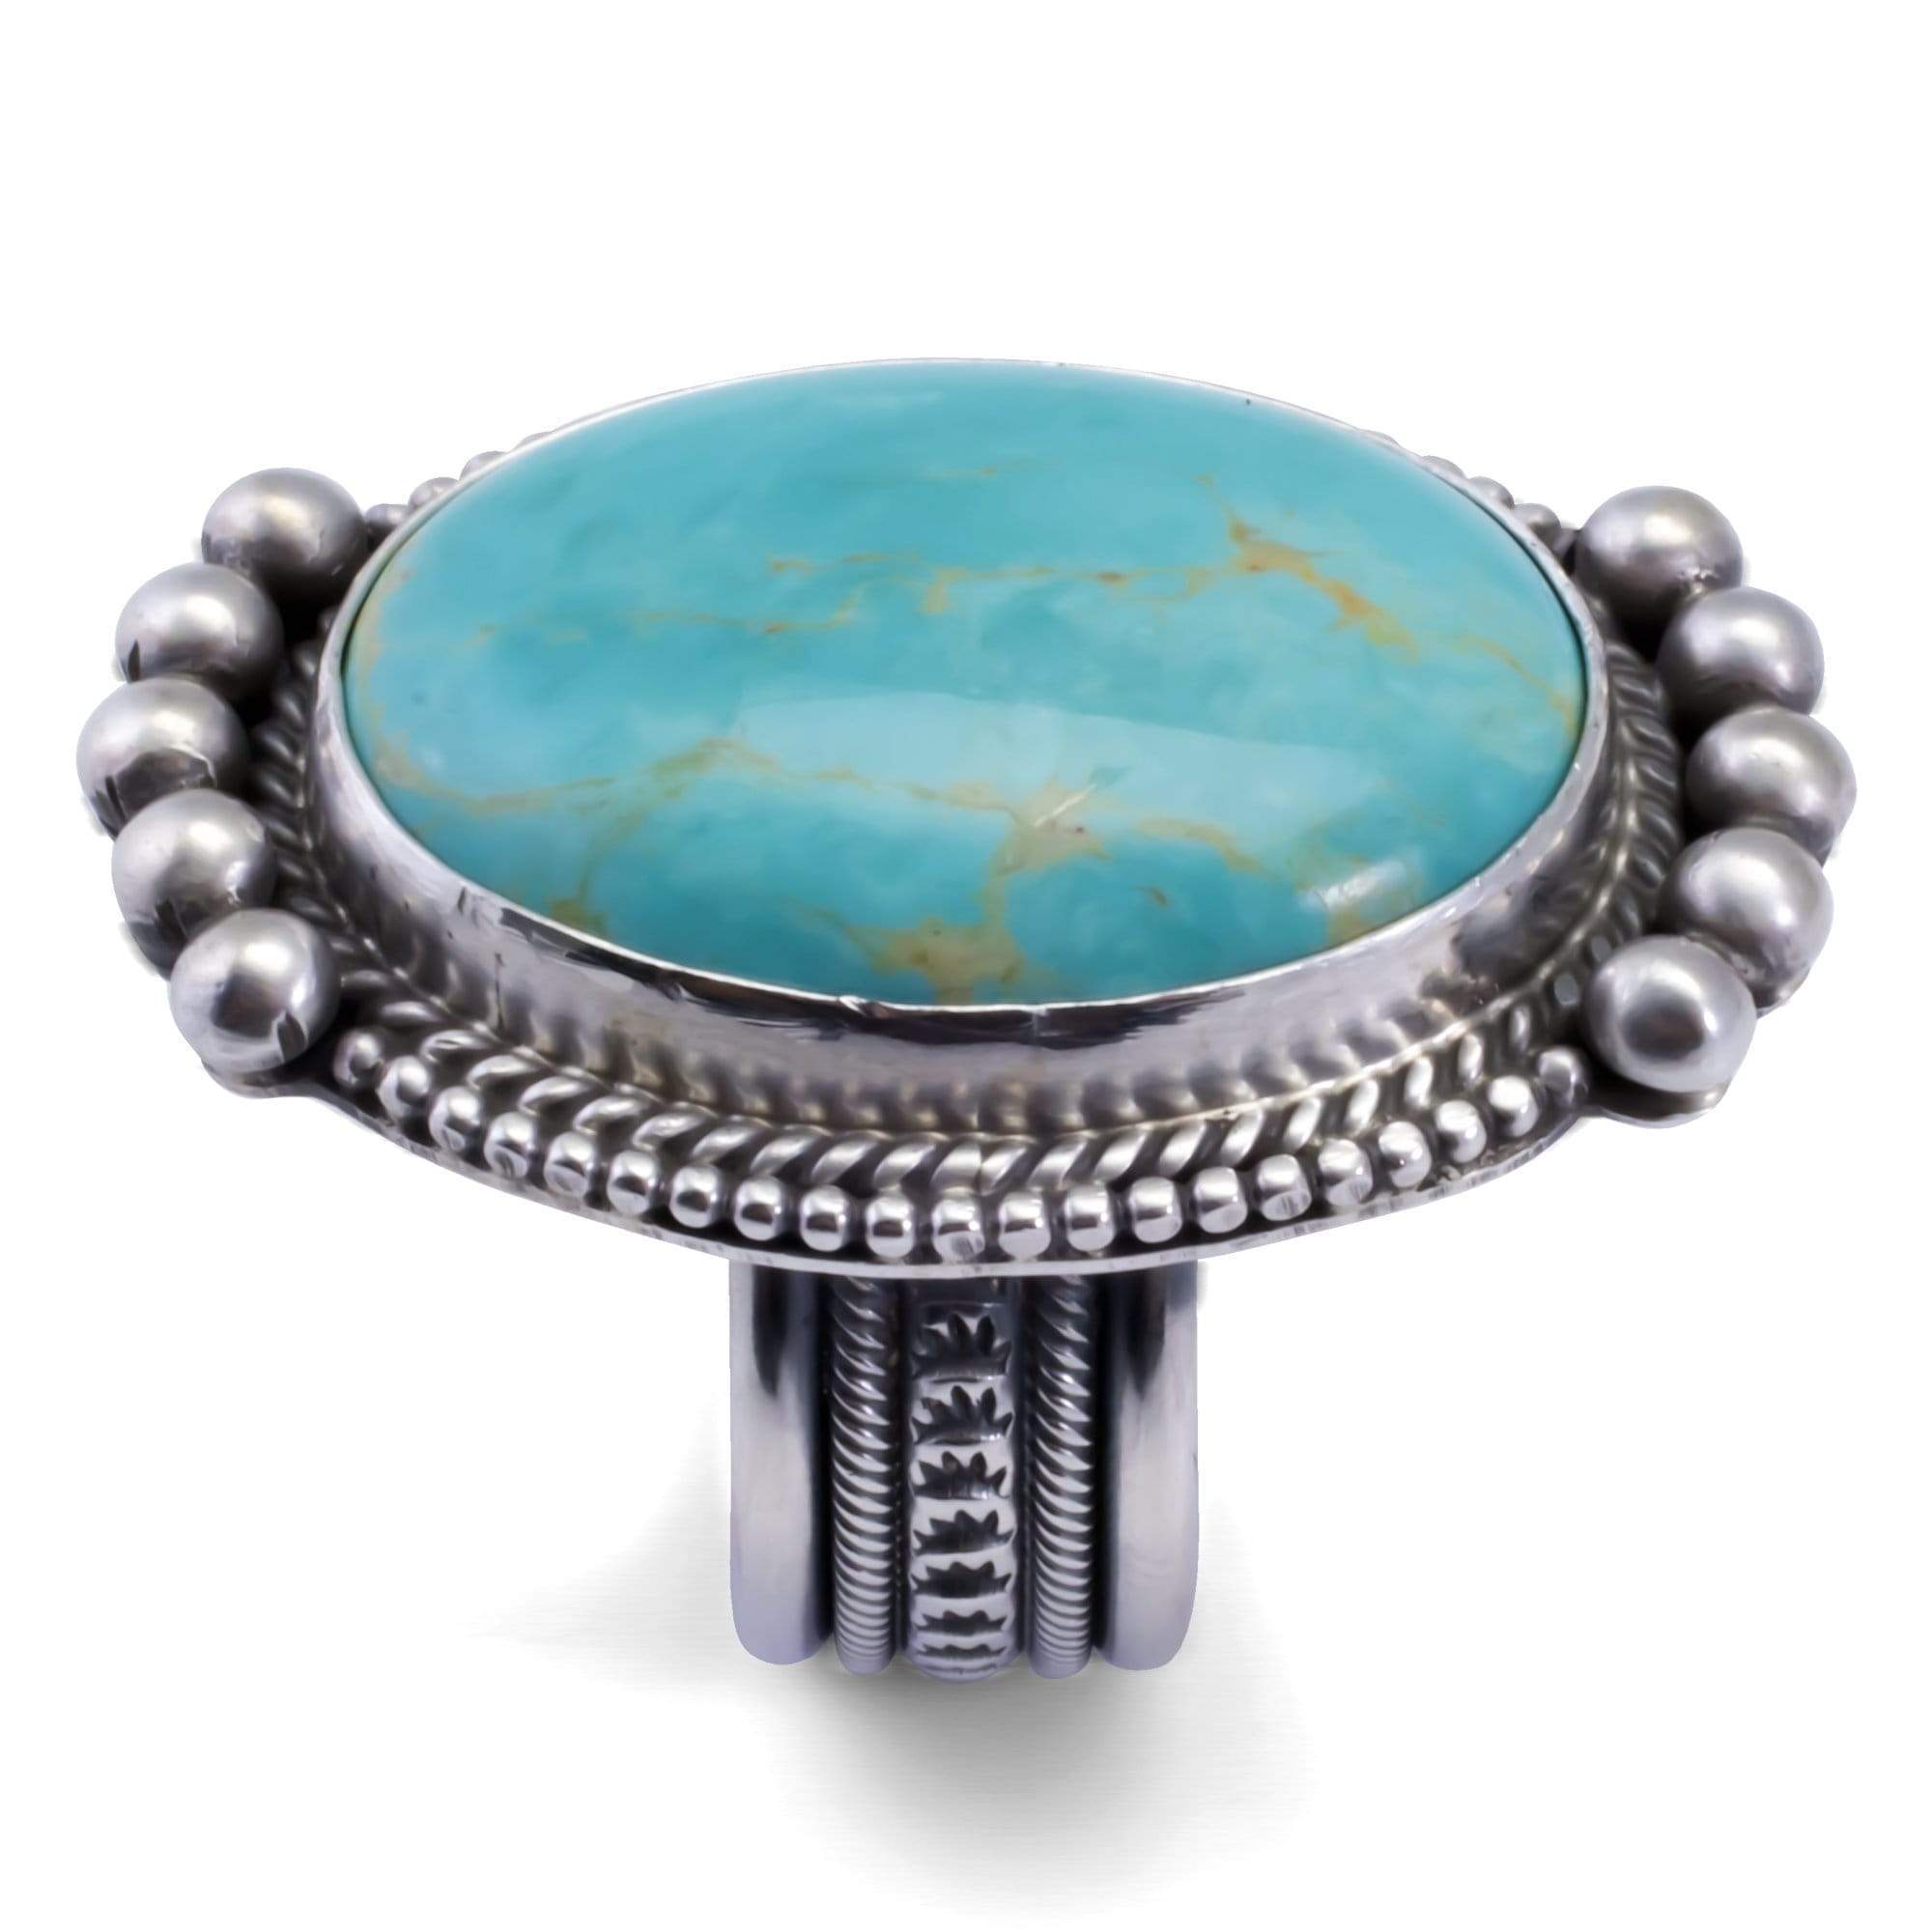 Kalifano Native American Jewelry 11 Michael Calladetto Tyrone Turquoise Native American Made 925 Sterling Silver Ring NAR1200.002.11